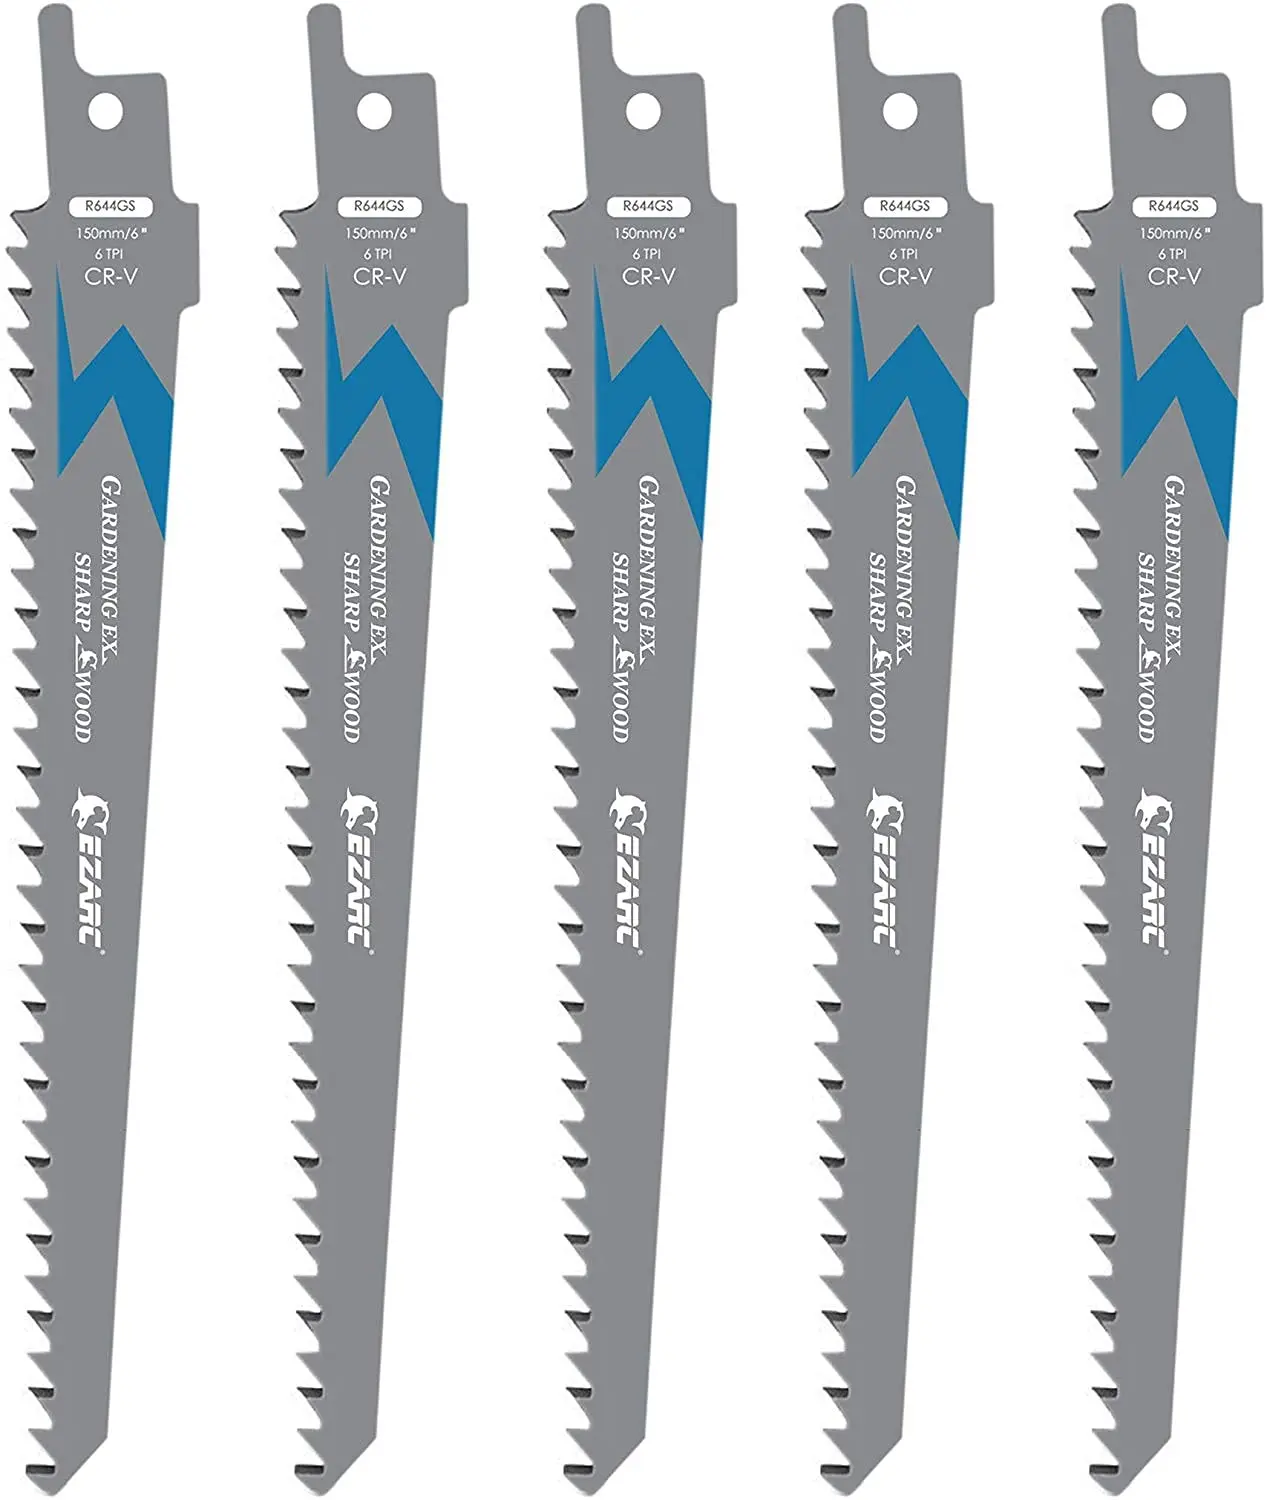 

802035 6-Inch Wood Pruning Reciprocating Saw Blade Sawzall Blades 6TPI R644GS (5-Pack)